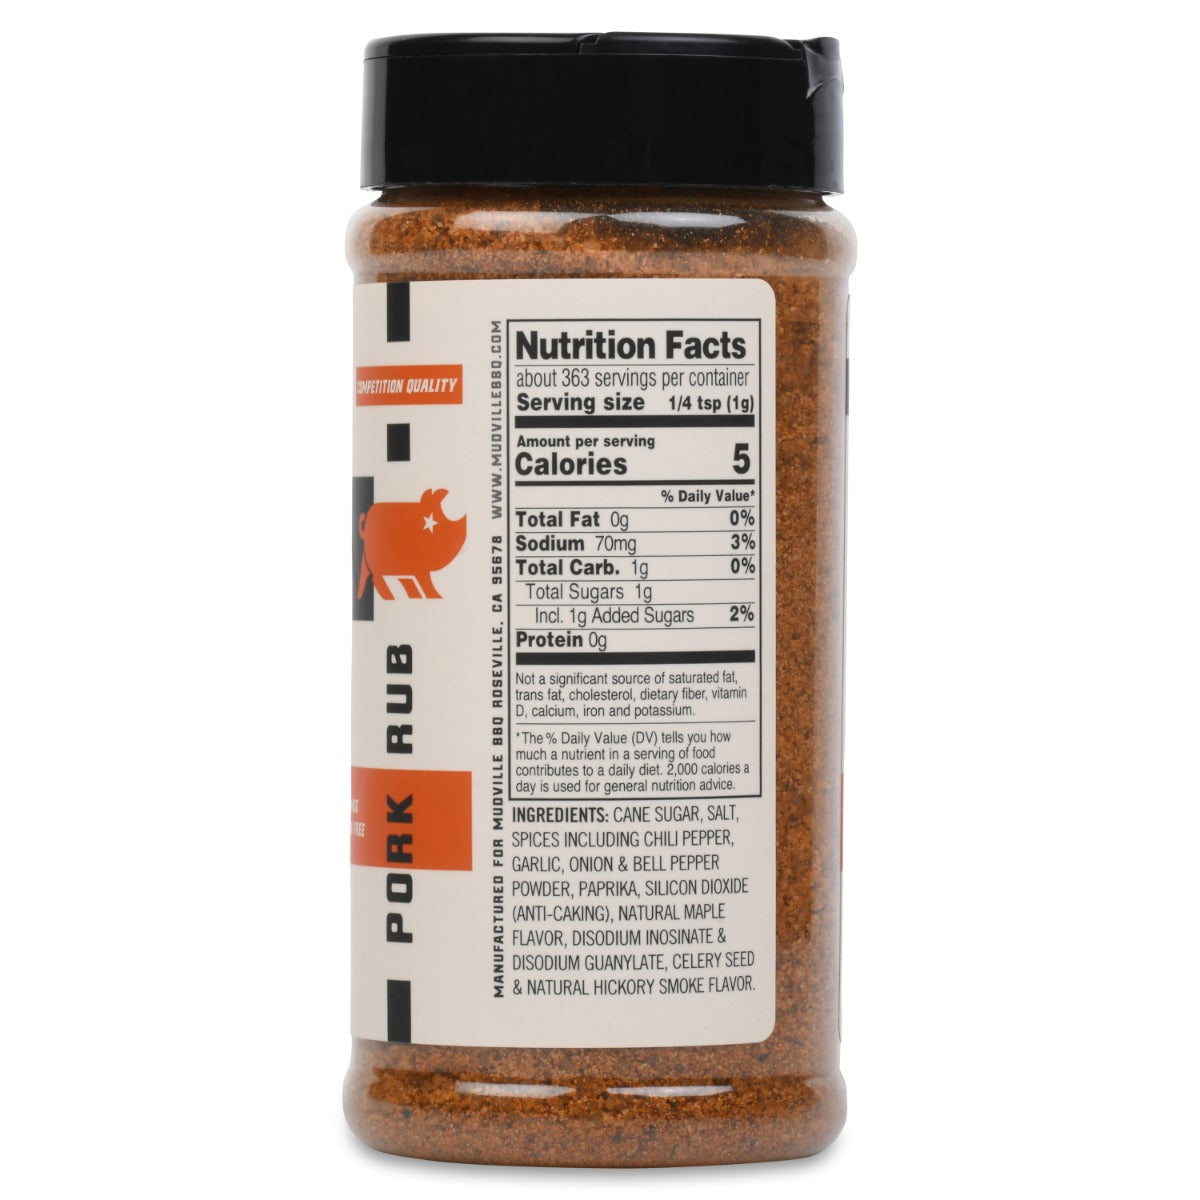 Side view of a Prime Pig Pork Rub bottle showing nutrition facts. Each serving is 1/4 tsp with 5 calories, 70mg sodium, 1g total carbohydrates, and 1g of added sugars. Ingredients include cane sugar, salt, spices, garlic, onion, bell pepper, and natural flavors.